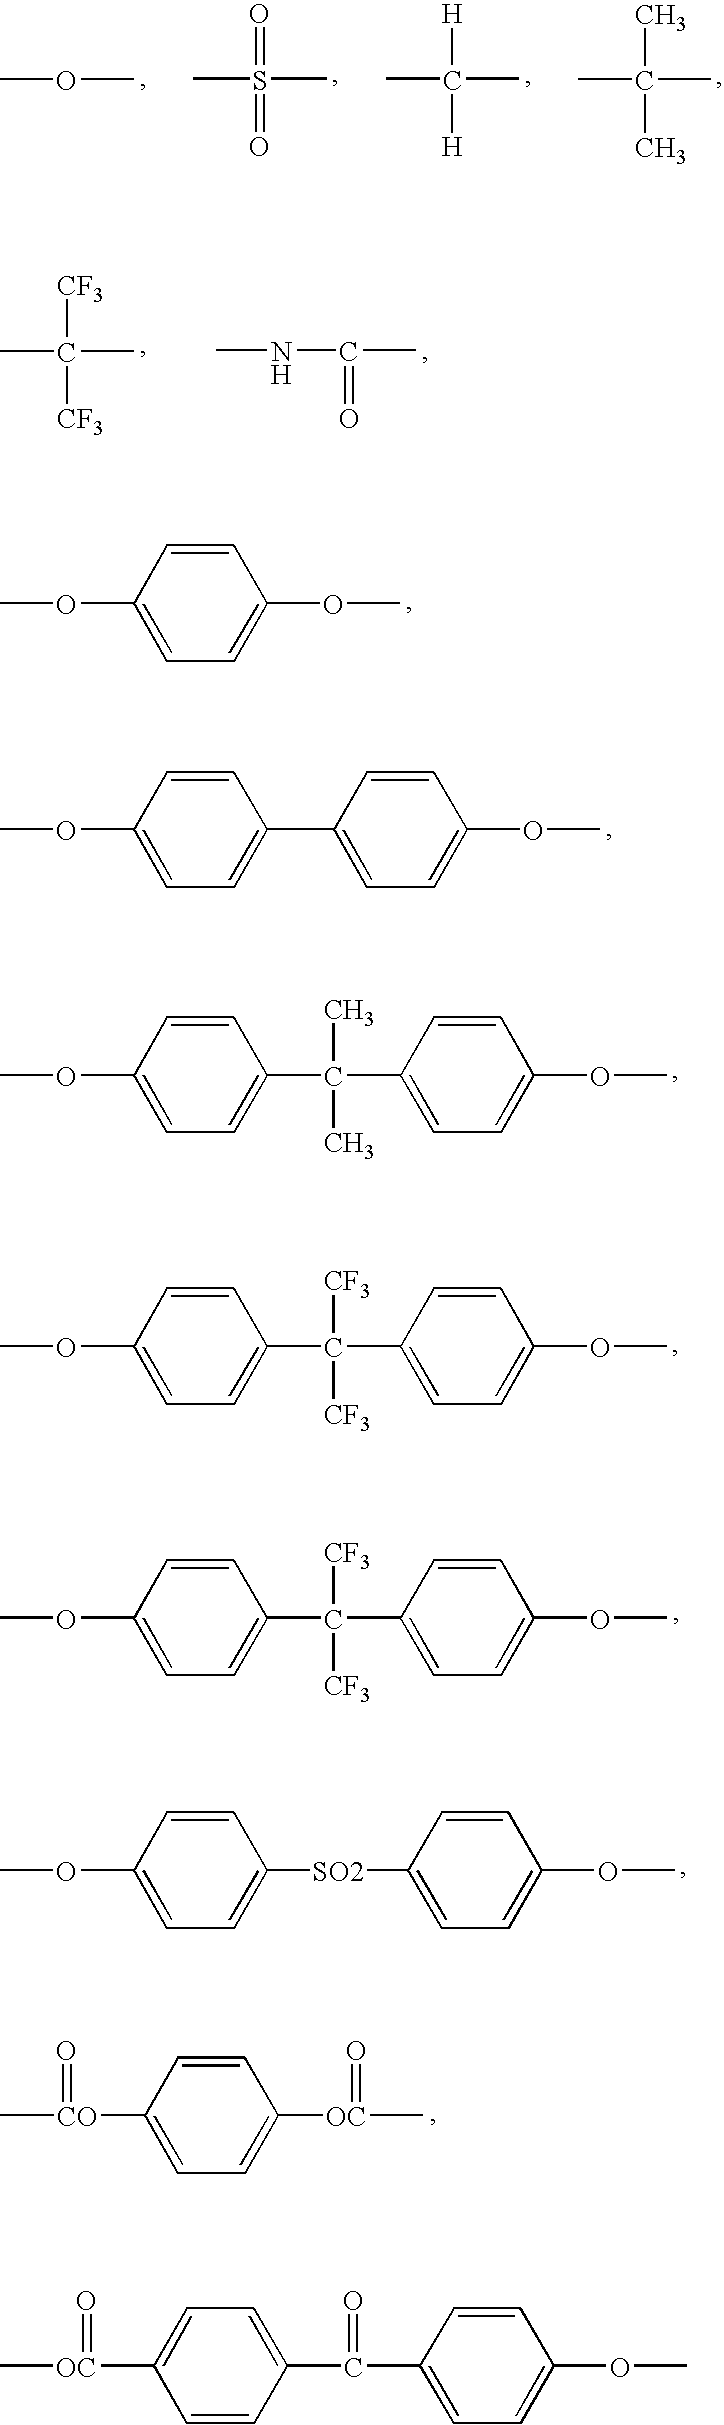 Novel Polyimide Film and Use Thereof